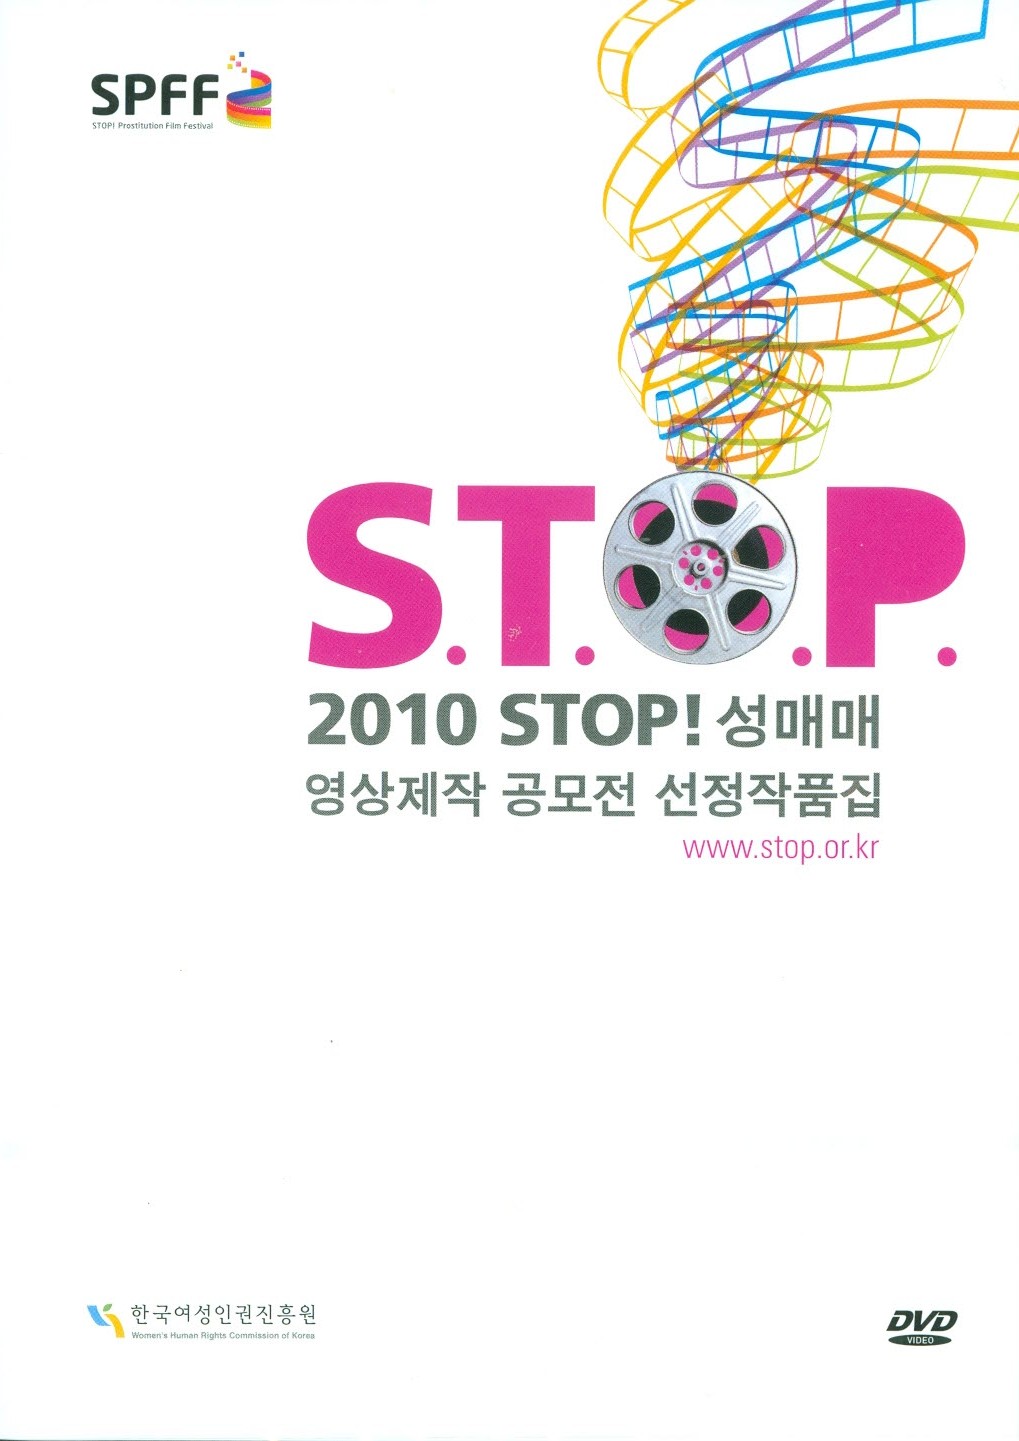 2010 Stop! Prostitution Video Contest Selection (DVD)